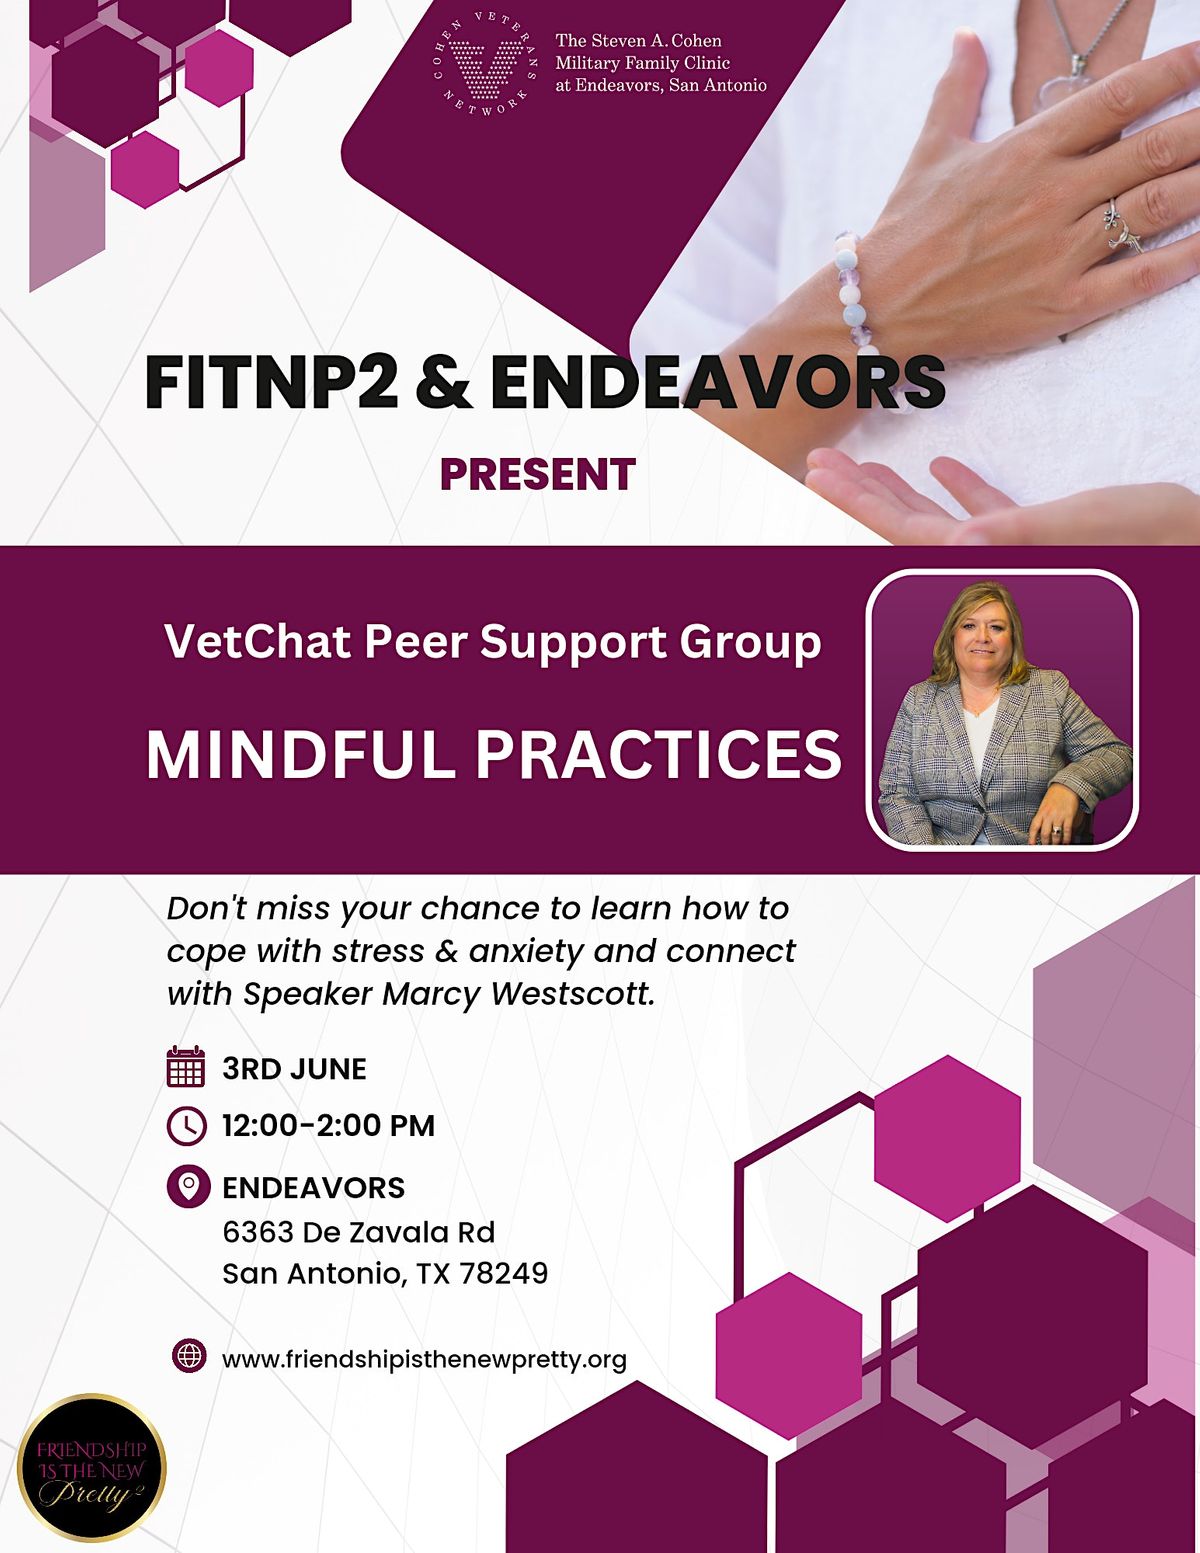 FITNP2 Vet Chat & Endeavors - Presents Mindful Practices